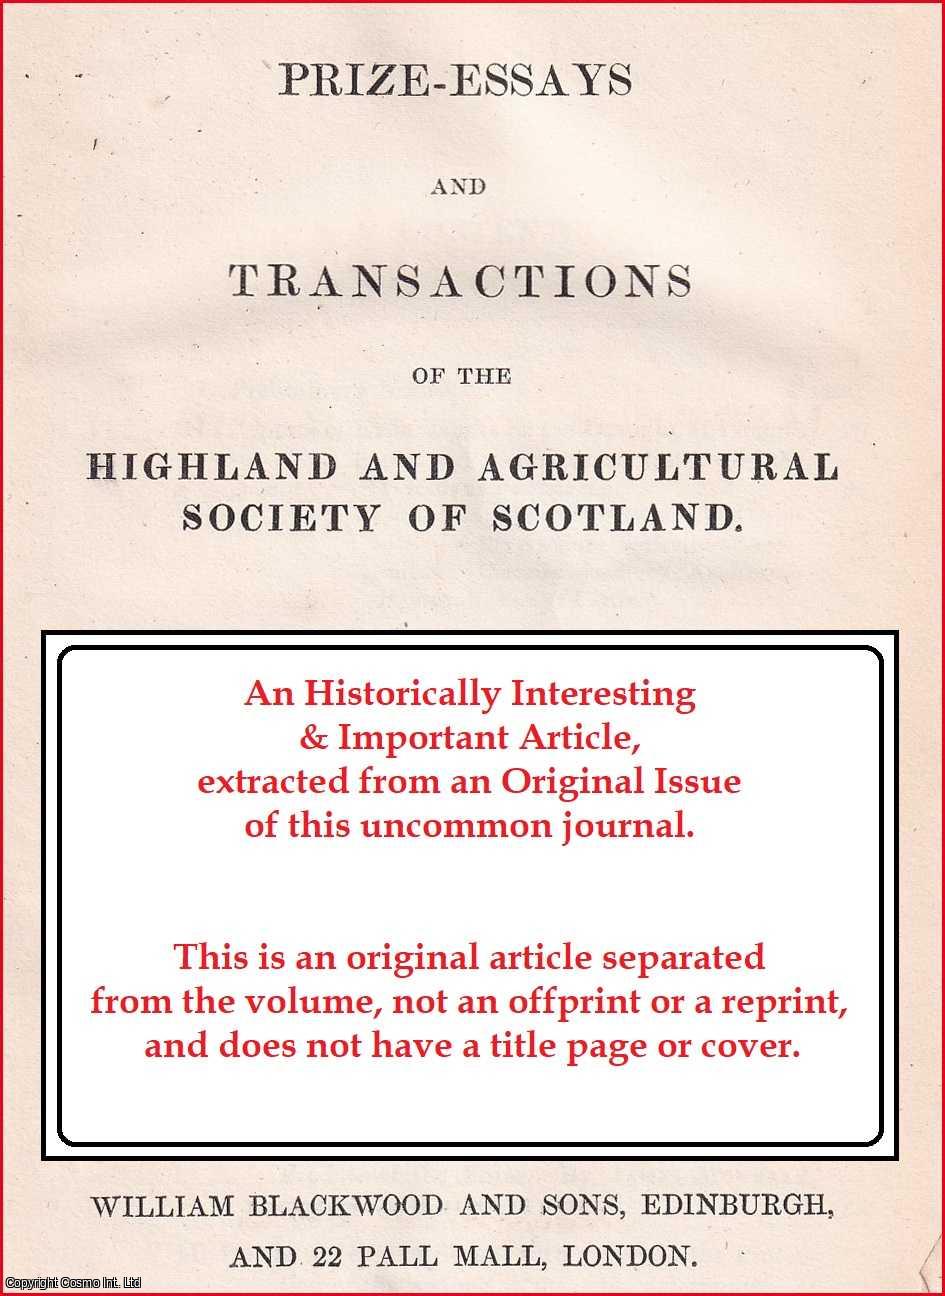 Mr. John England, Aberdeen. - The Rearing & Management of Domestic Poultry. An uncommon original article from the Prize Essays and Transactions of the Highland Society of Scotland, 1835.